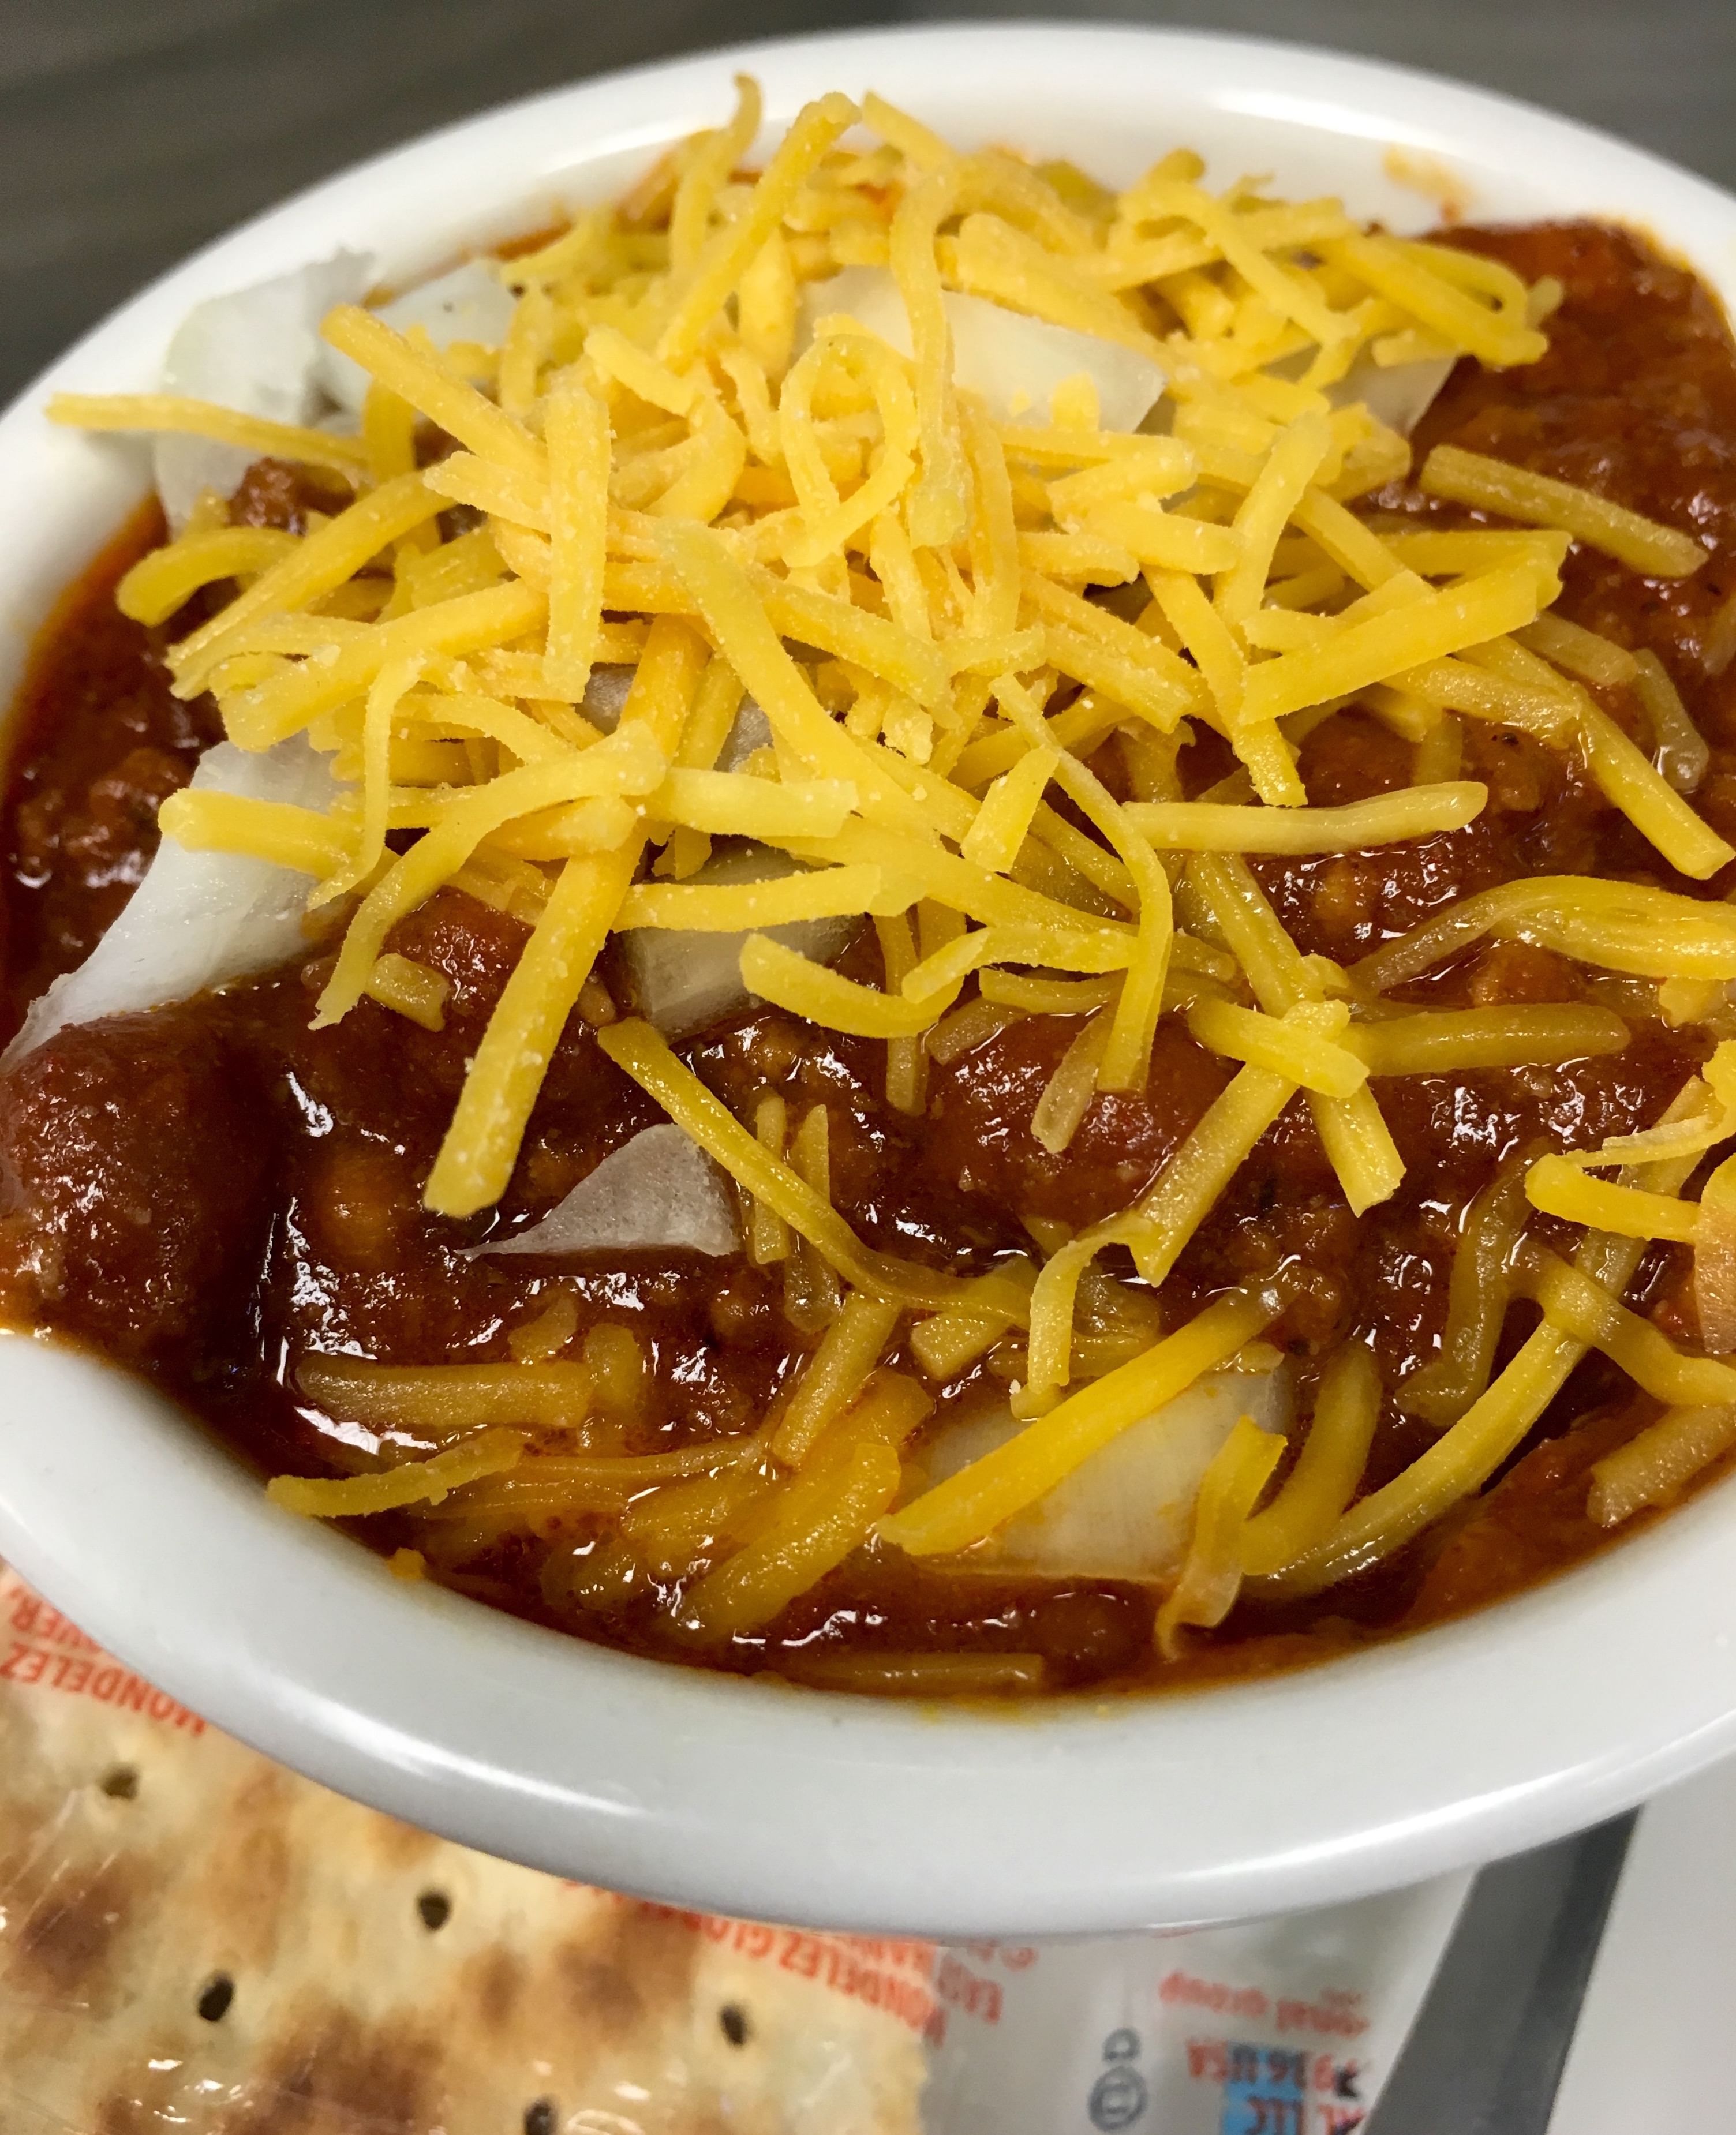 Chili (Best in Town!!)